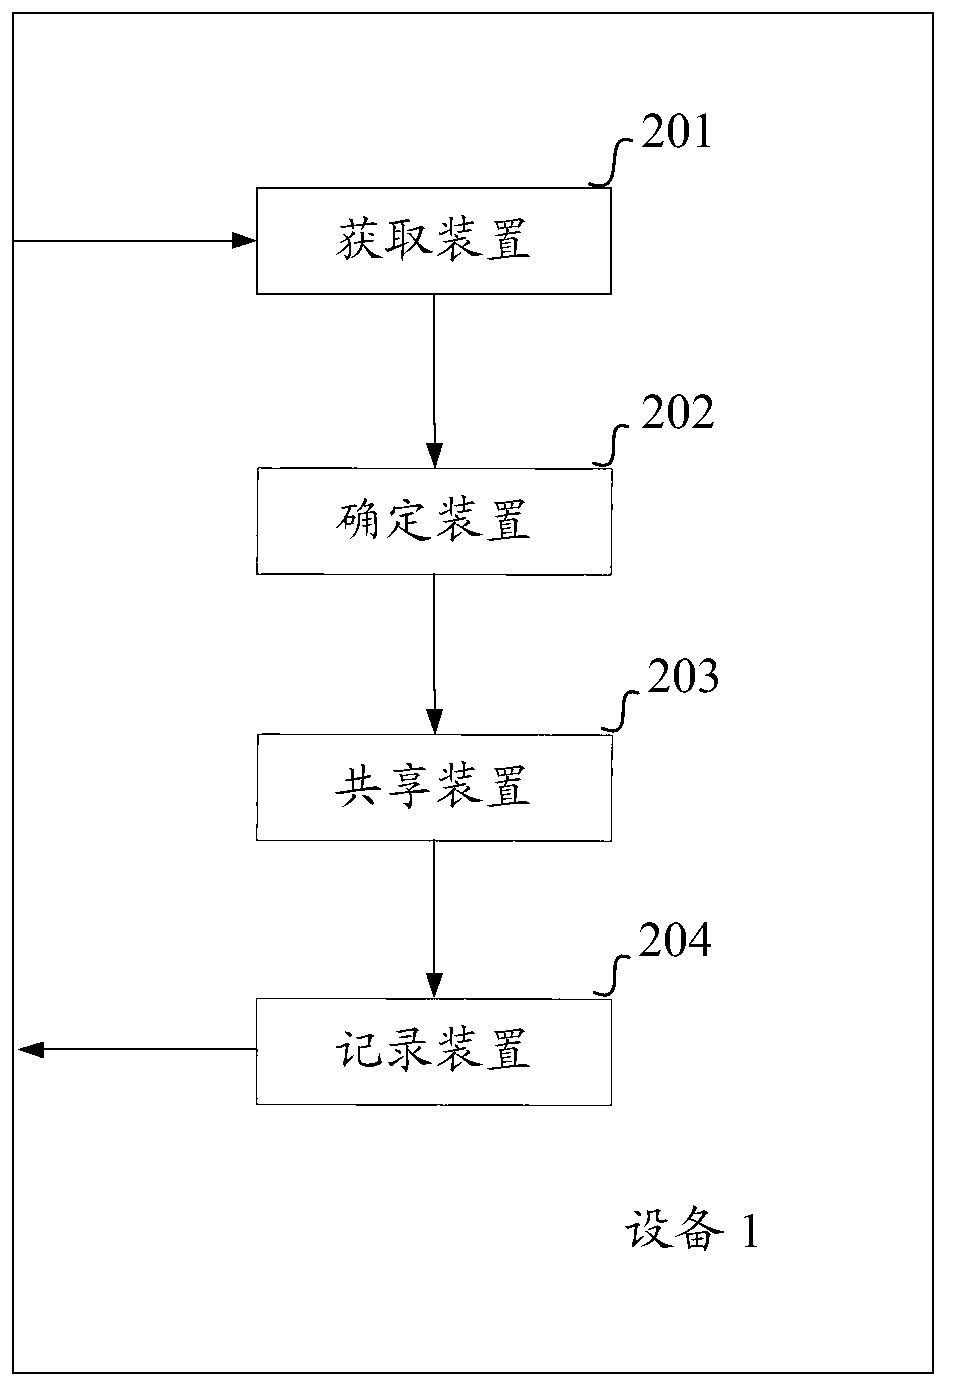 Contact person information sharing method and equipment based on sharing permission level